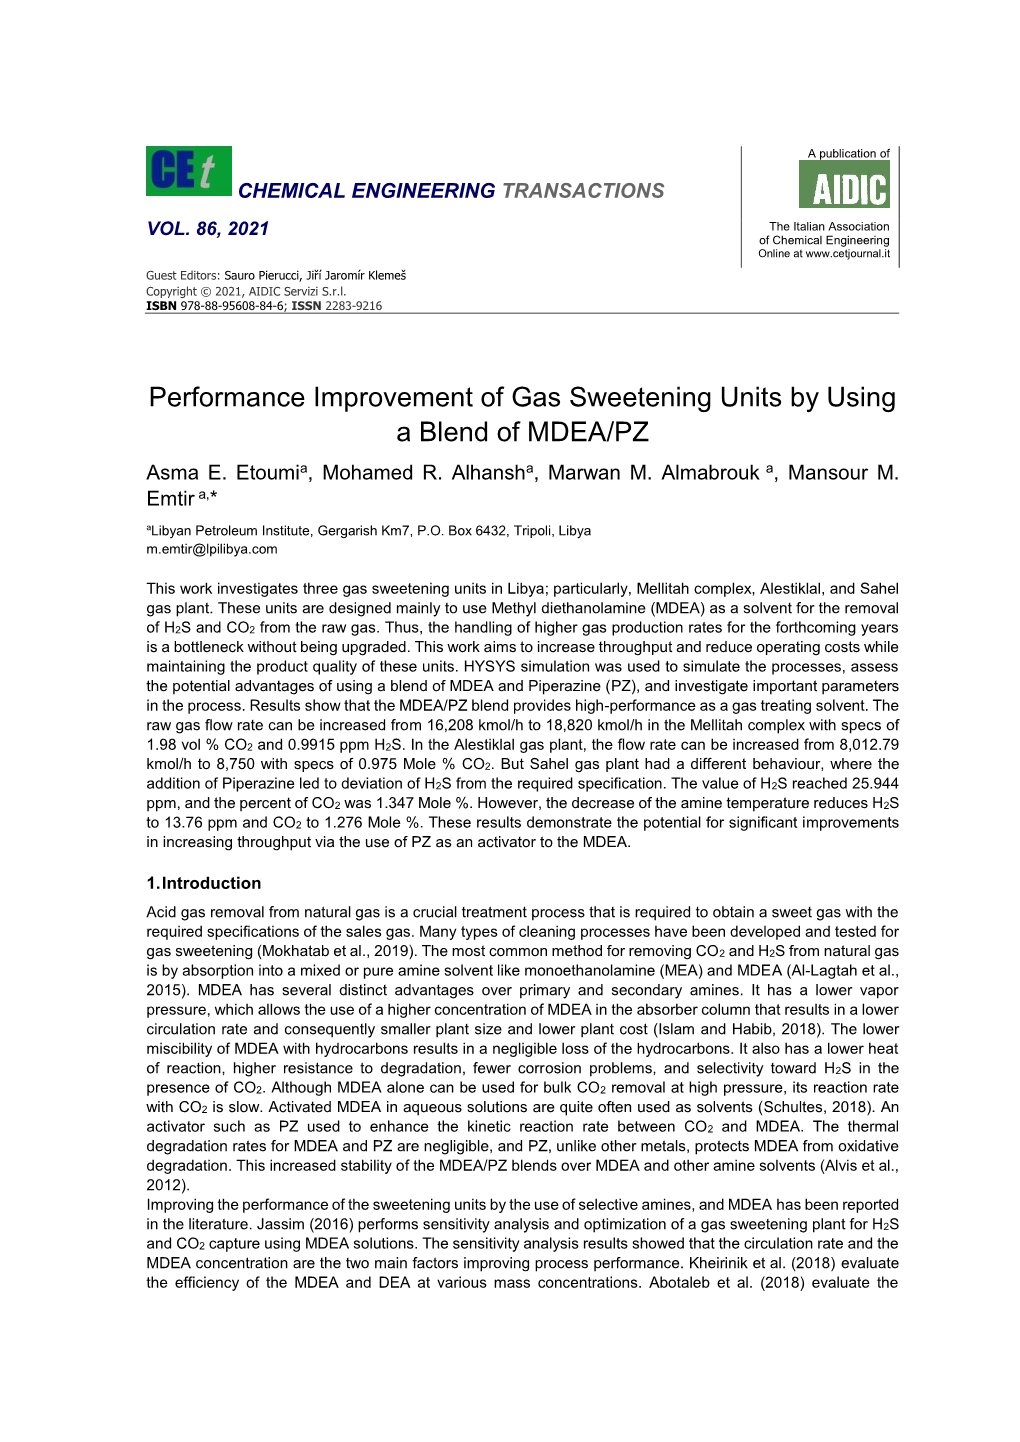 Performance Improvement of Gas Sweetening Units by Using a Blend of MDEA/PZ Asma E